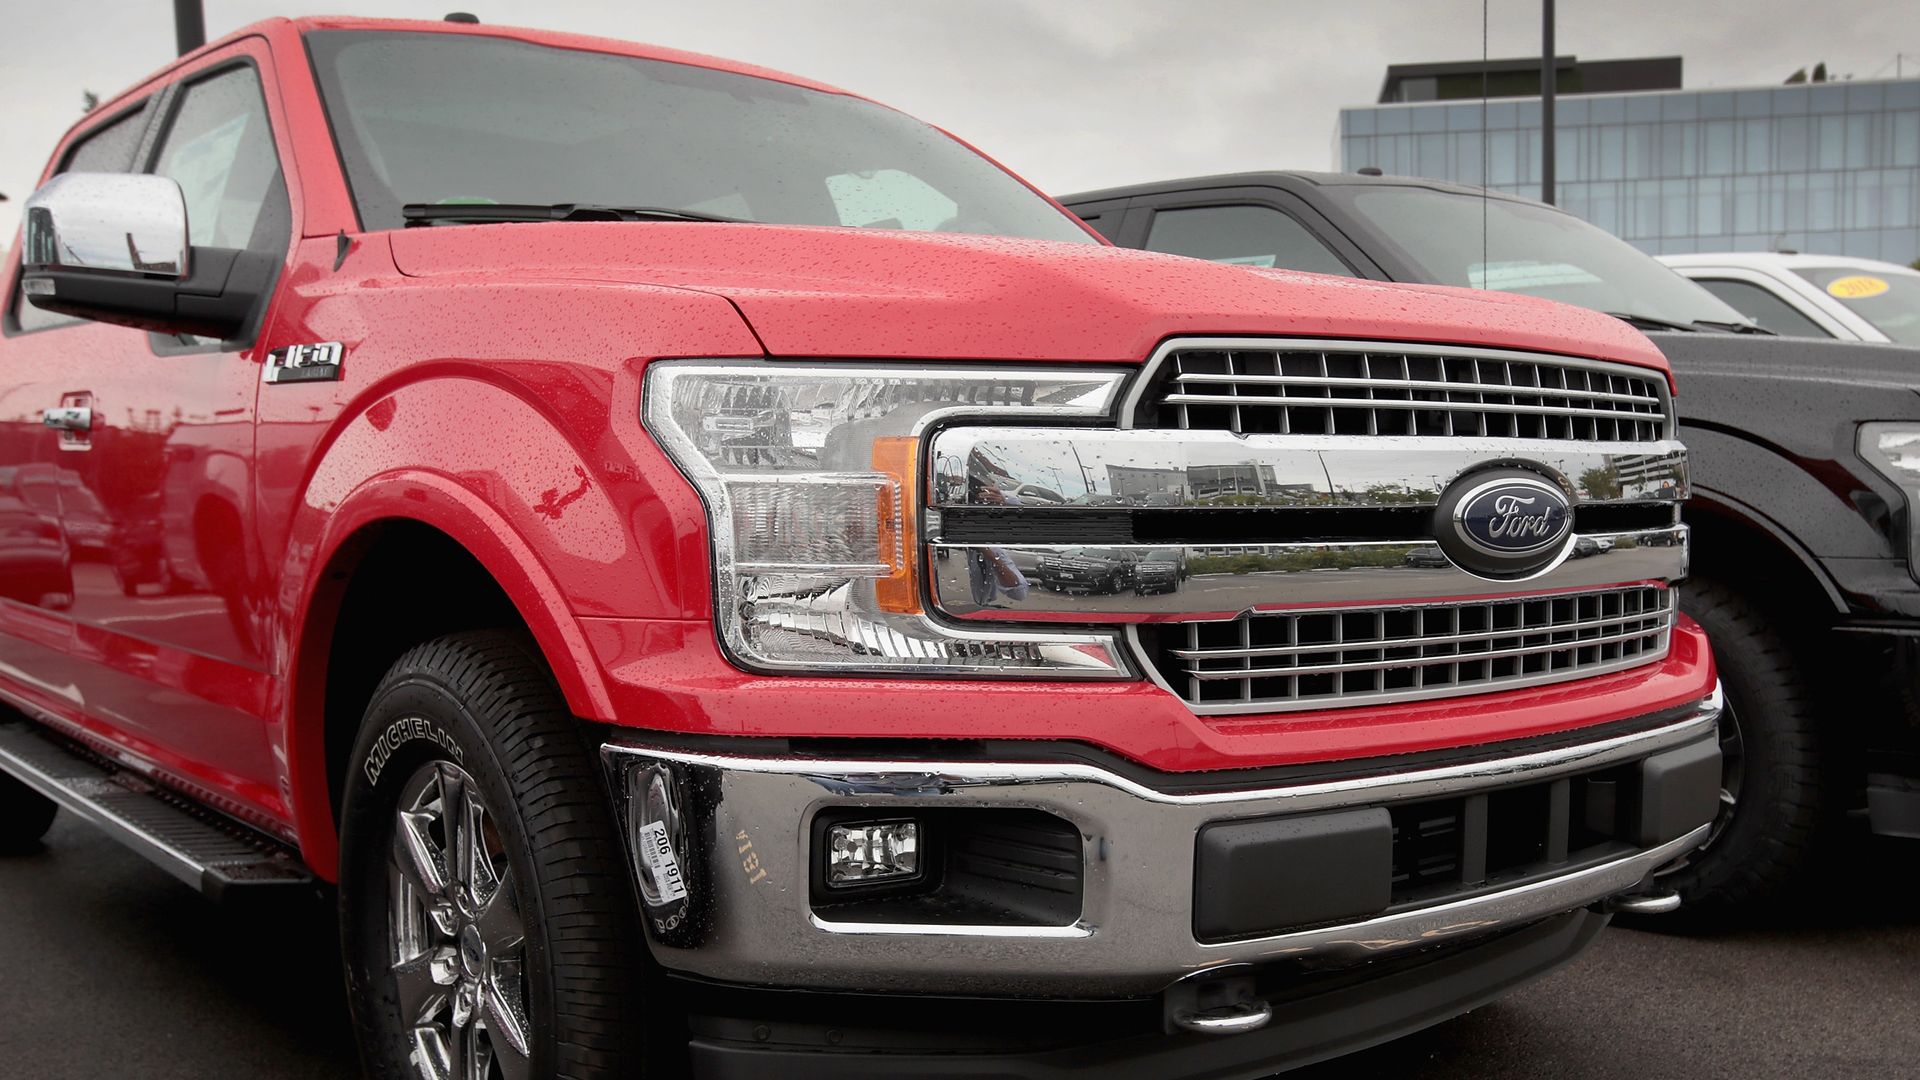 Ford Motor Company has announced a major recall of its top selling F-150 after 19 drivers reported their brakes activated while driving.